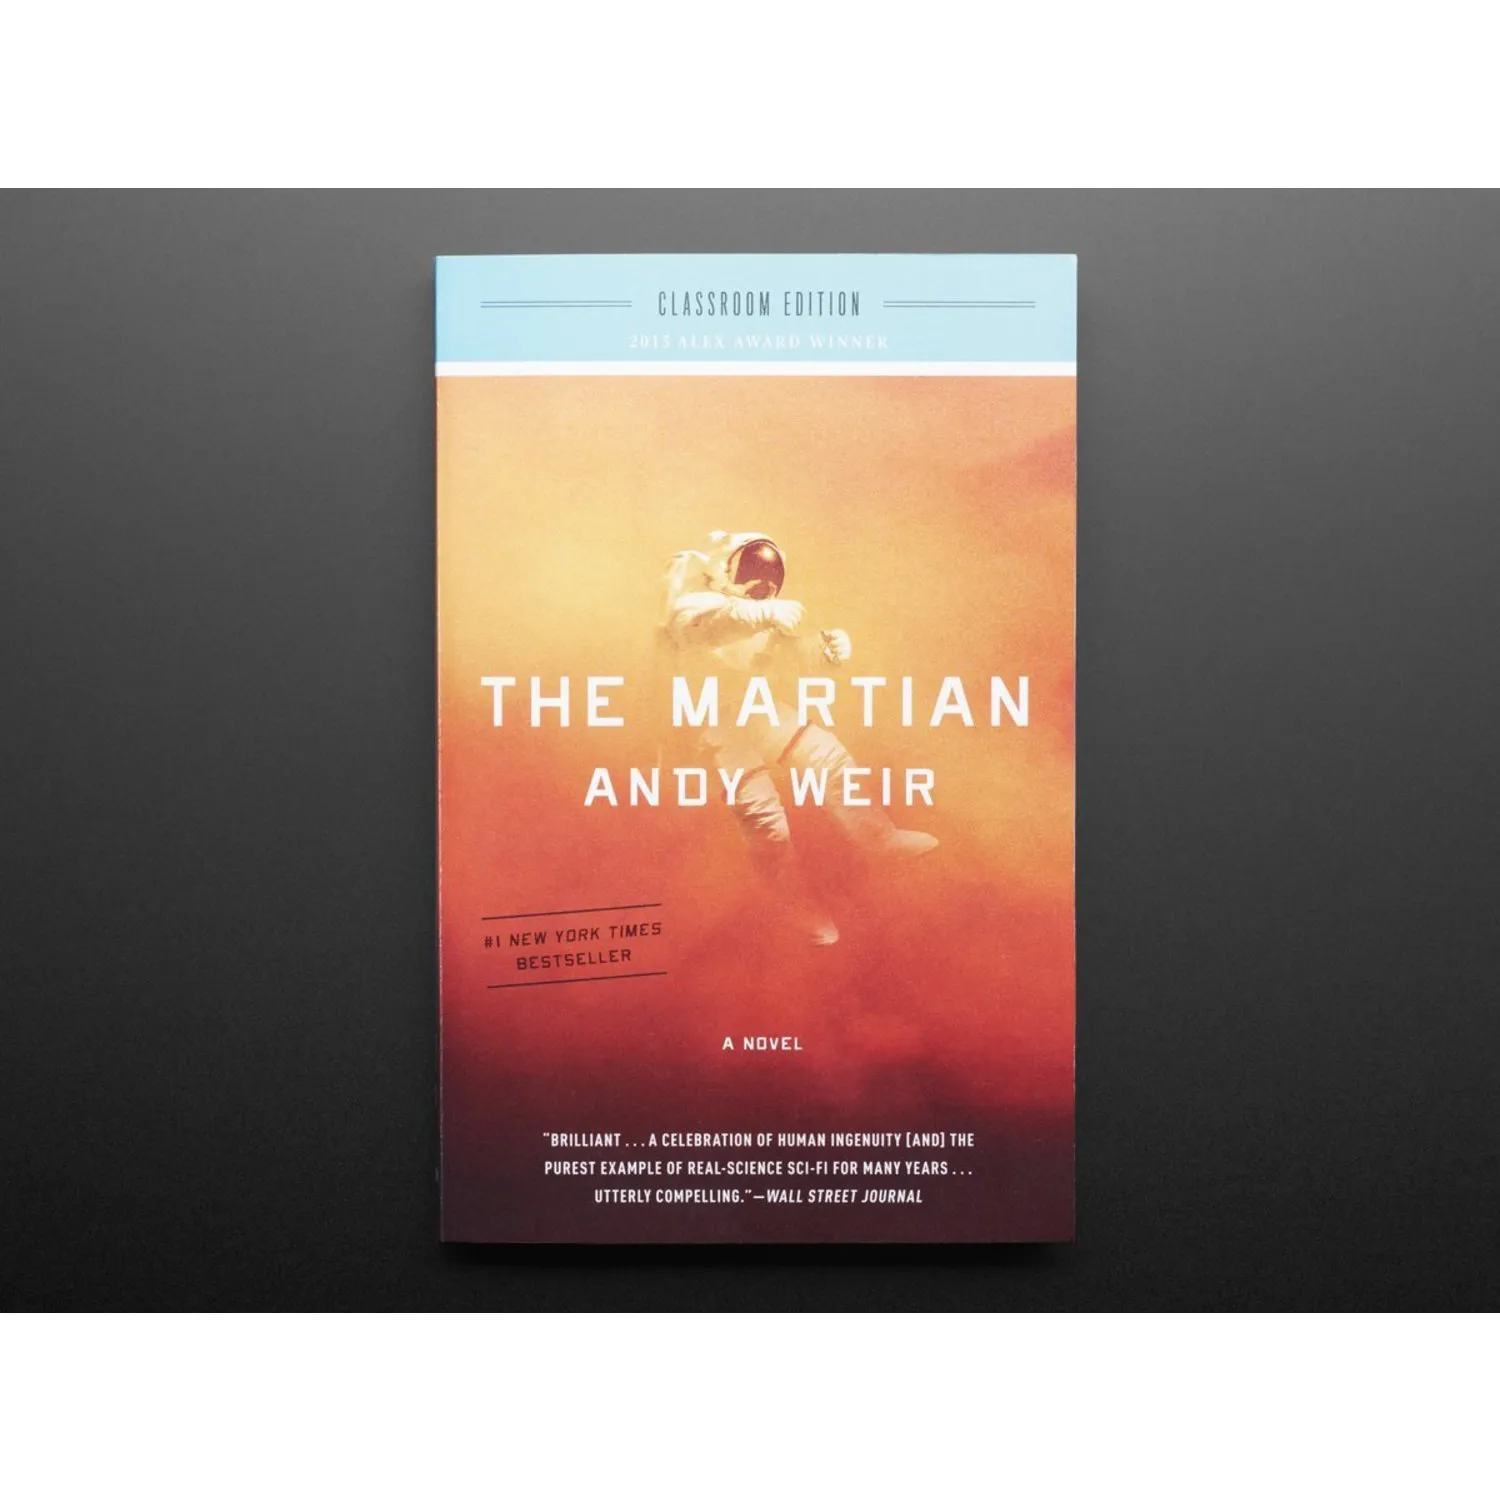 Photo of The Martian: A Novel - Classroom Edition [by Andy Weir]